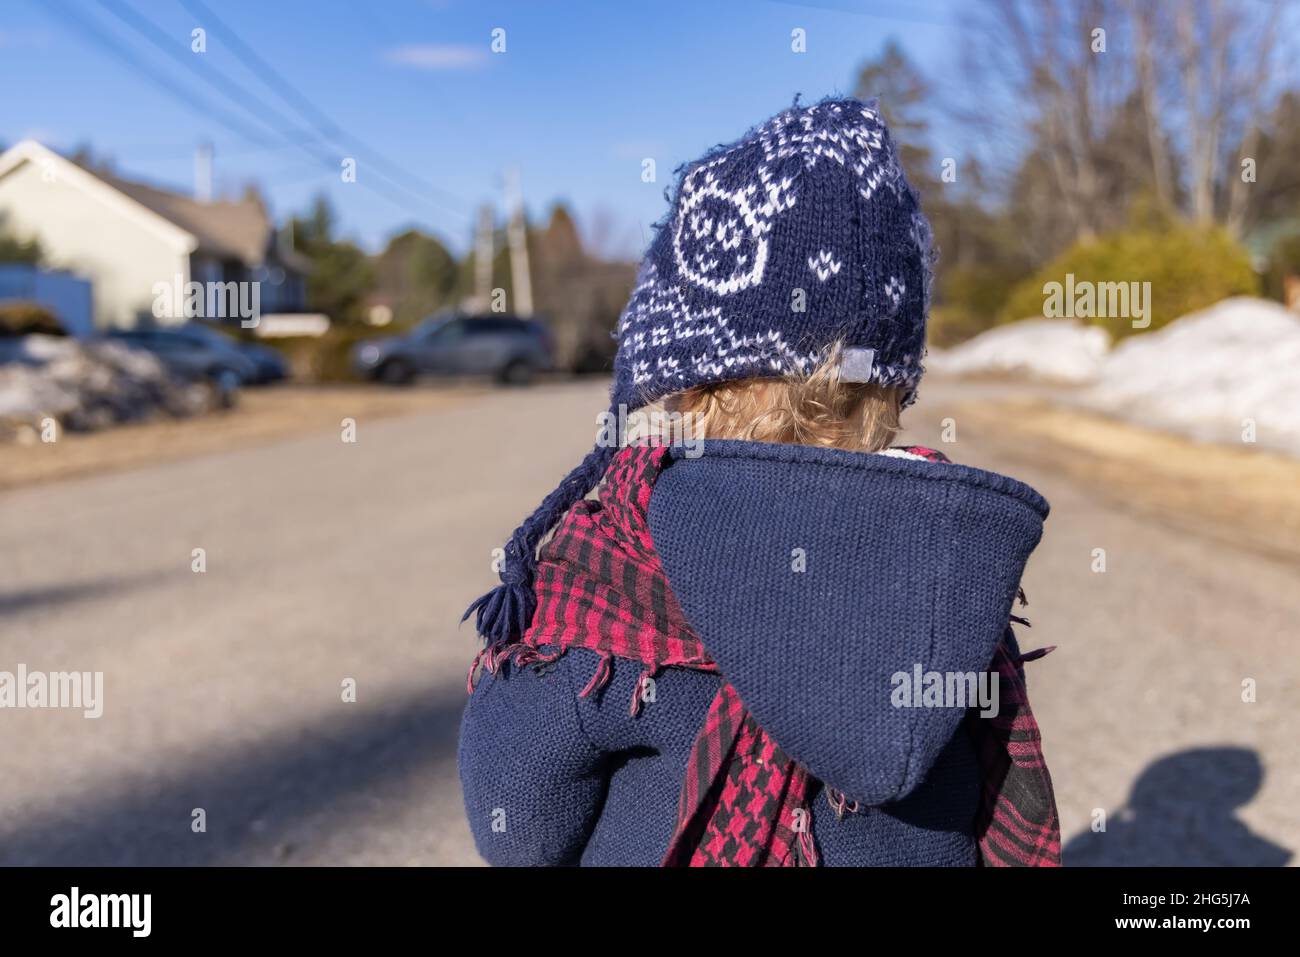 Back view of infant in winter clothing with thick coat, and blue wooly hat on a cold sunny day with blurred street view in background and copy space. Stock Photo